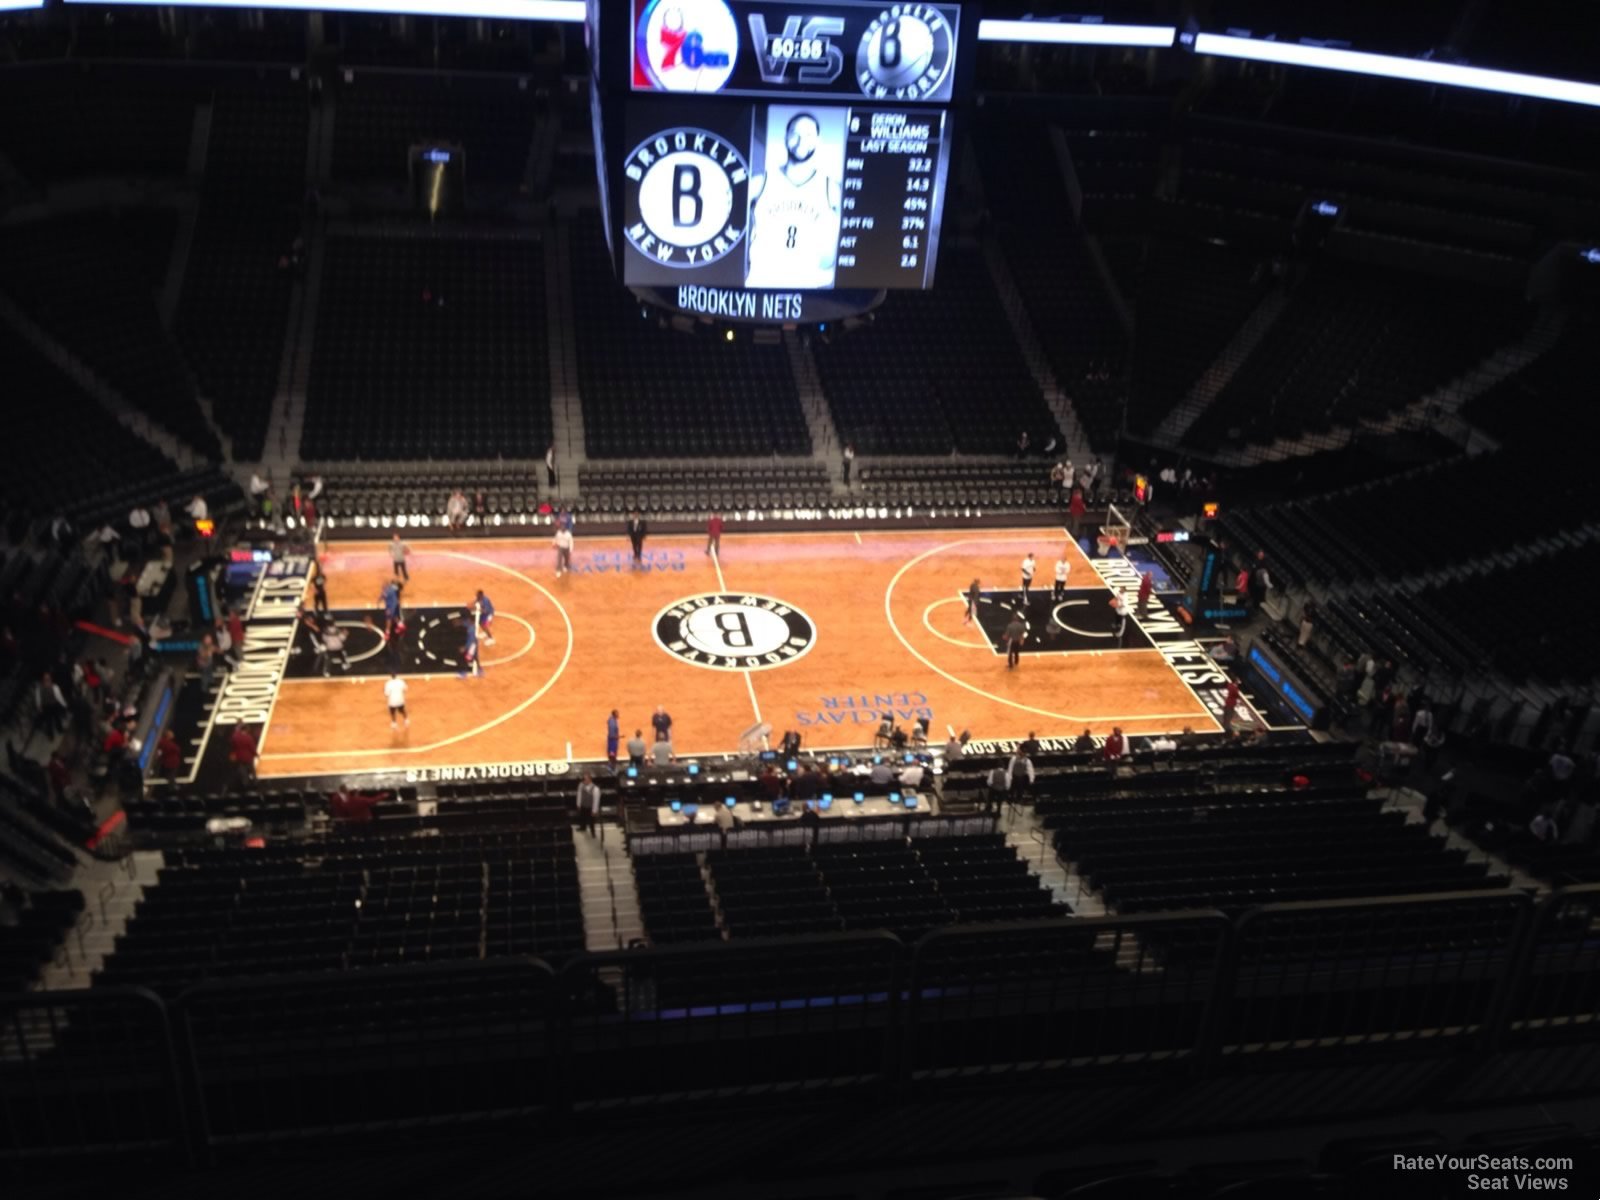 section 209, row 7 seat view  for basketball - barclays center